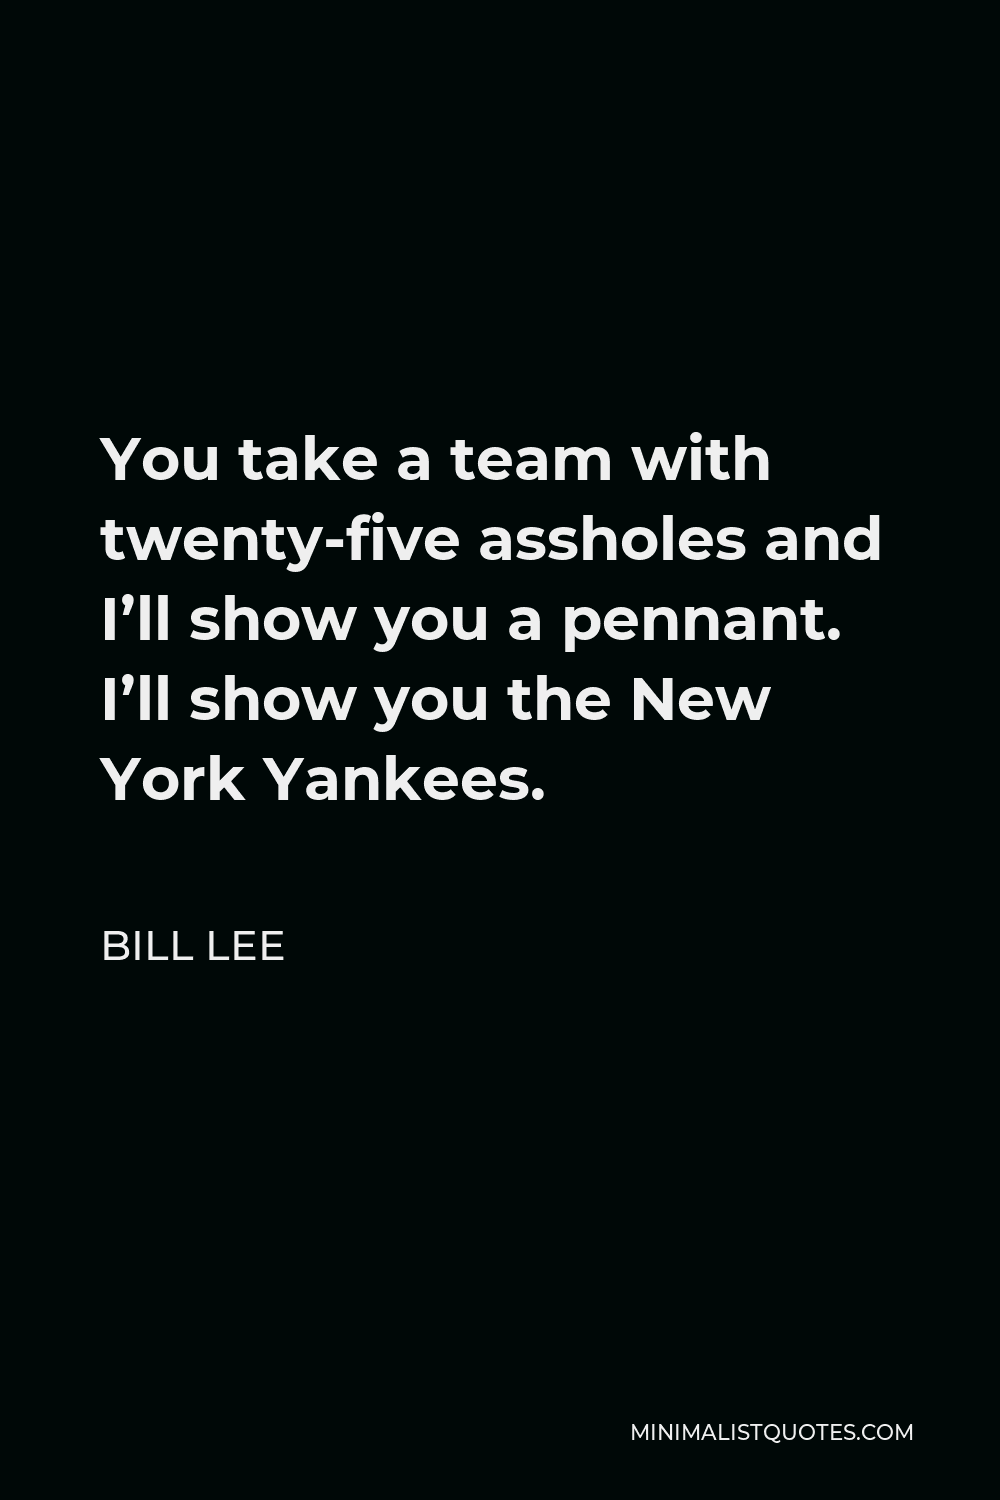 Bill Lee Quote - You take a team with twenty-five assholes and I’ll show you a pennant. I’ll show you the New York Yankees.